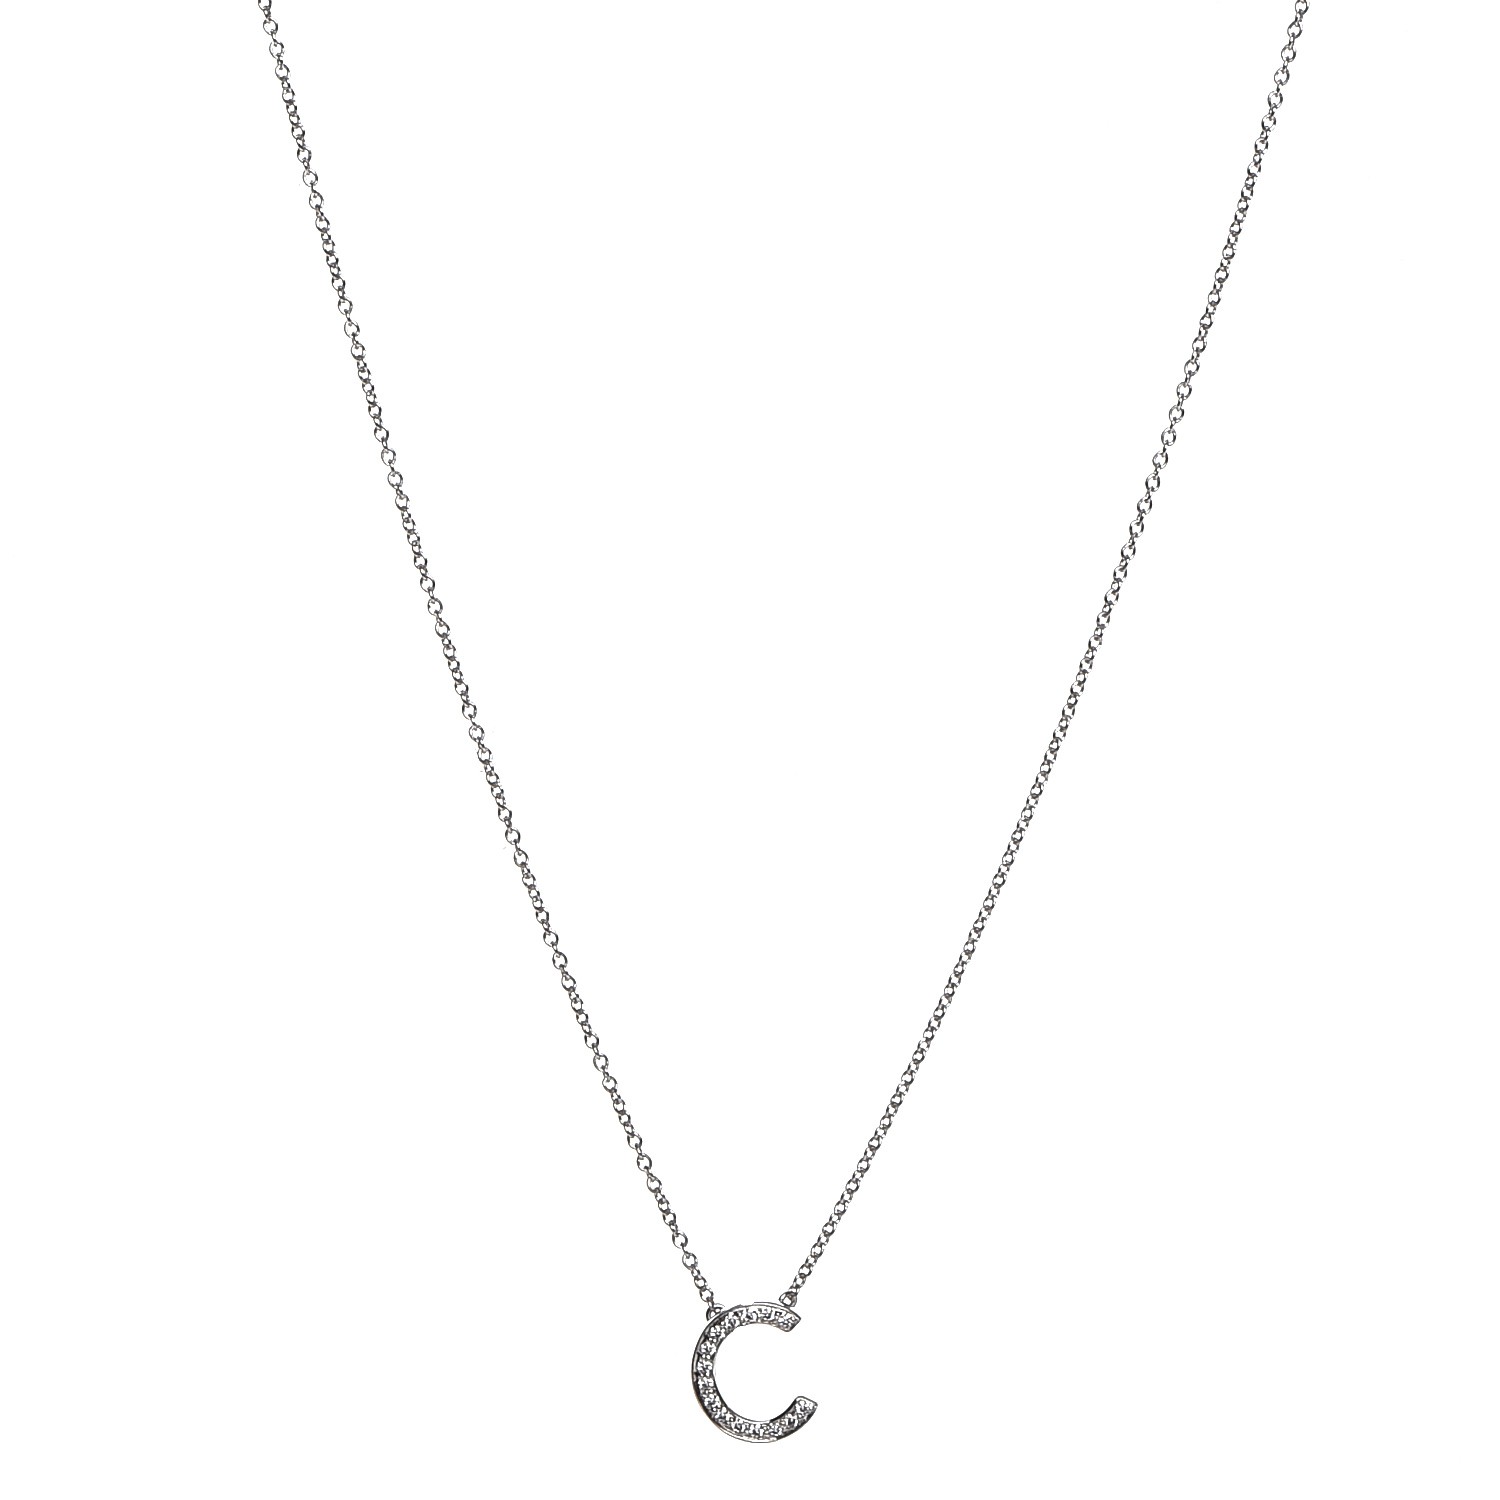 c initial necklace tiffany